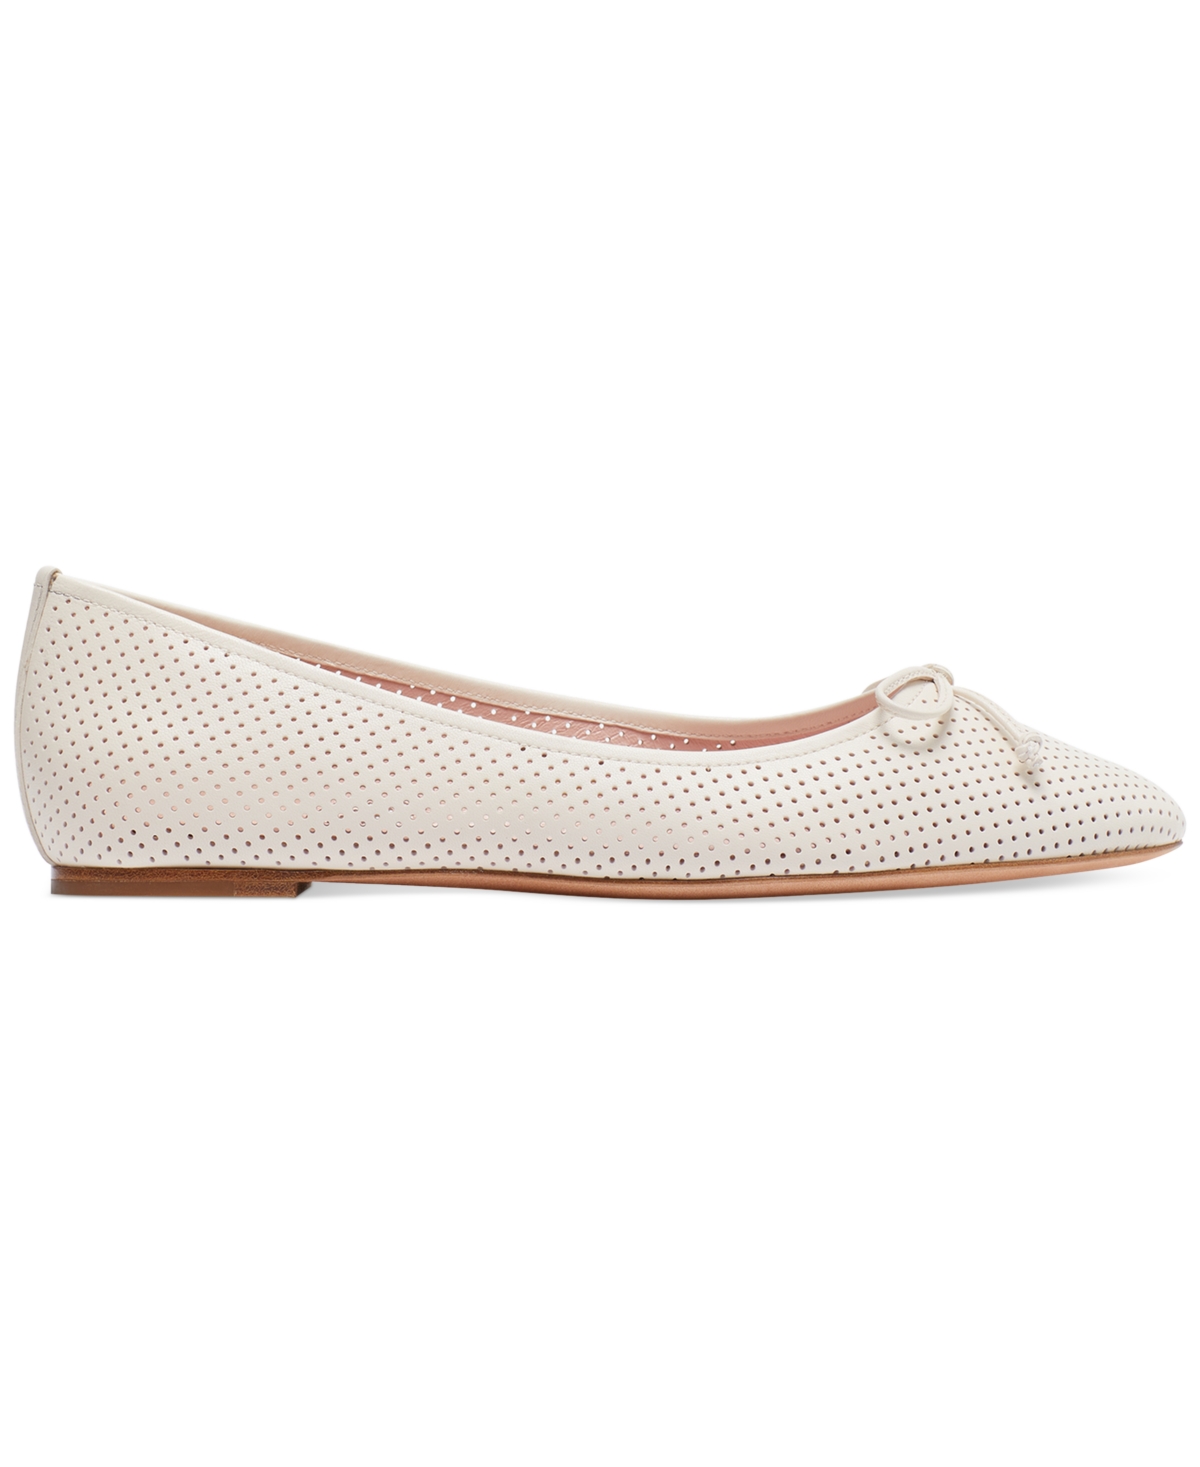 Shop Kate Spade Women's Veronica Slip-on Perforated Ballet Flats In Captain Navy